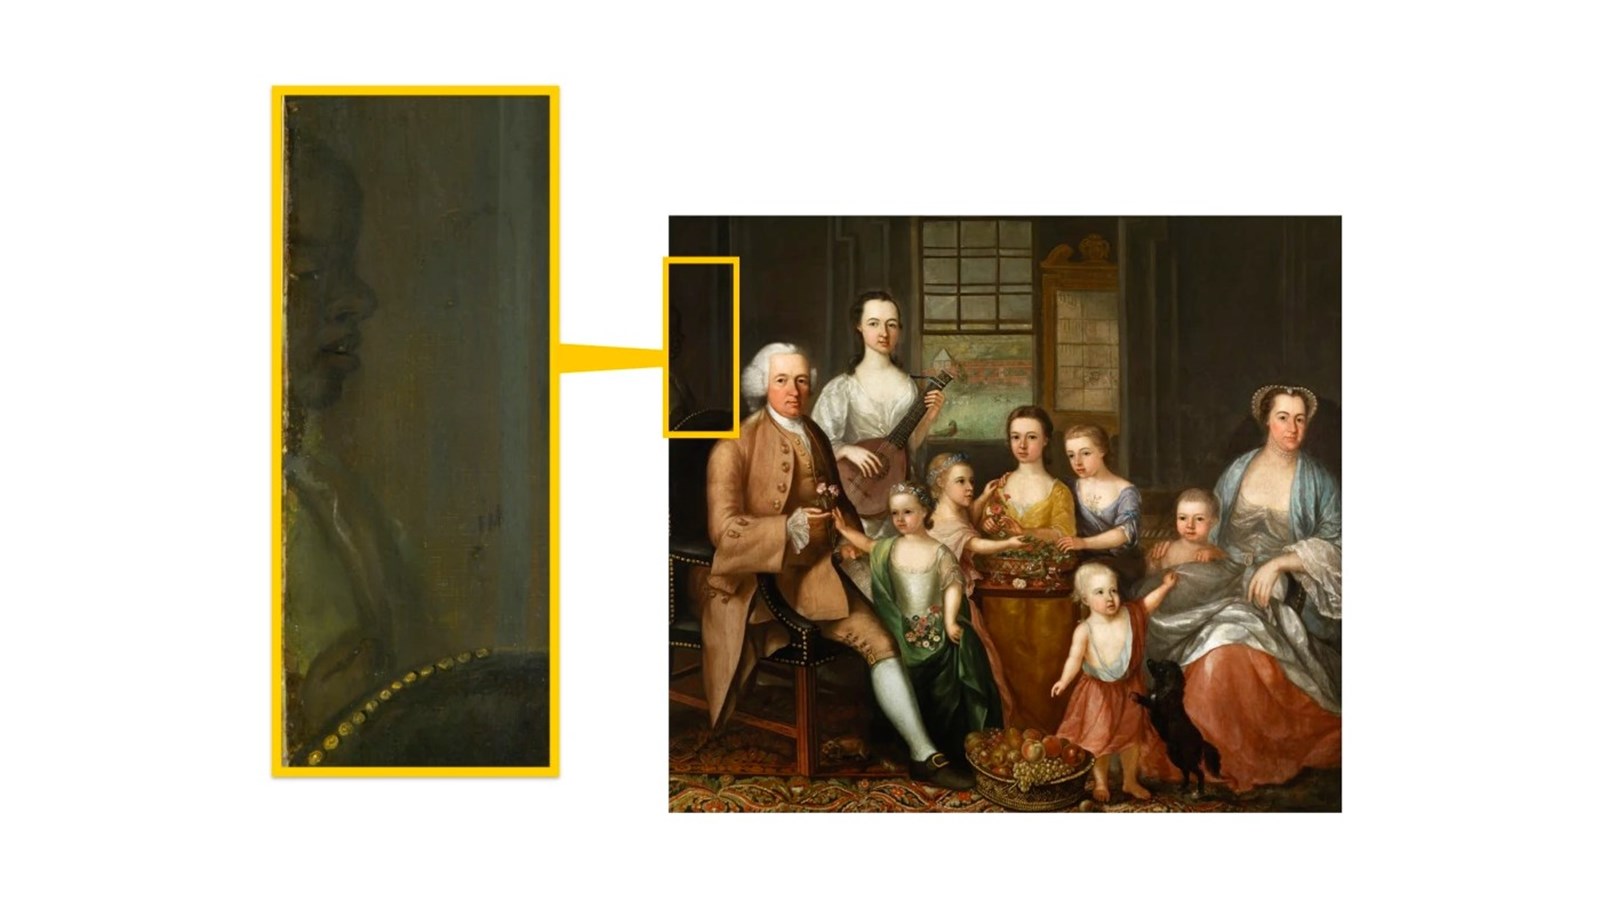 an image showing a painted portrait of a group of people. There is a pop-out box showing detail of a person who has been painted out from the portrait.